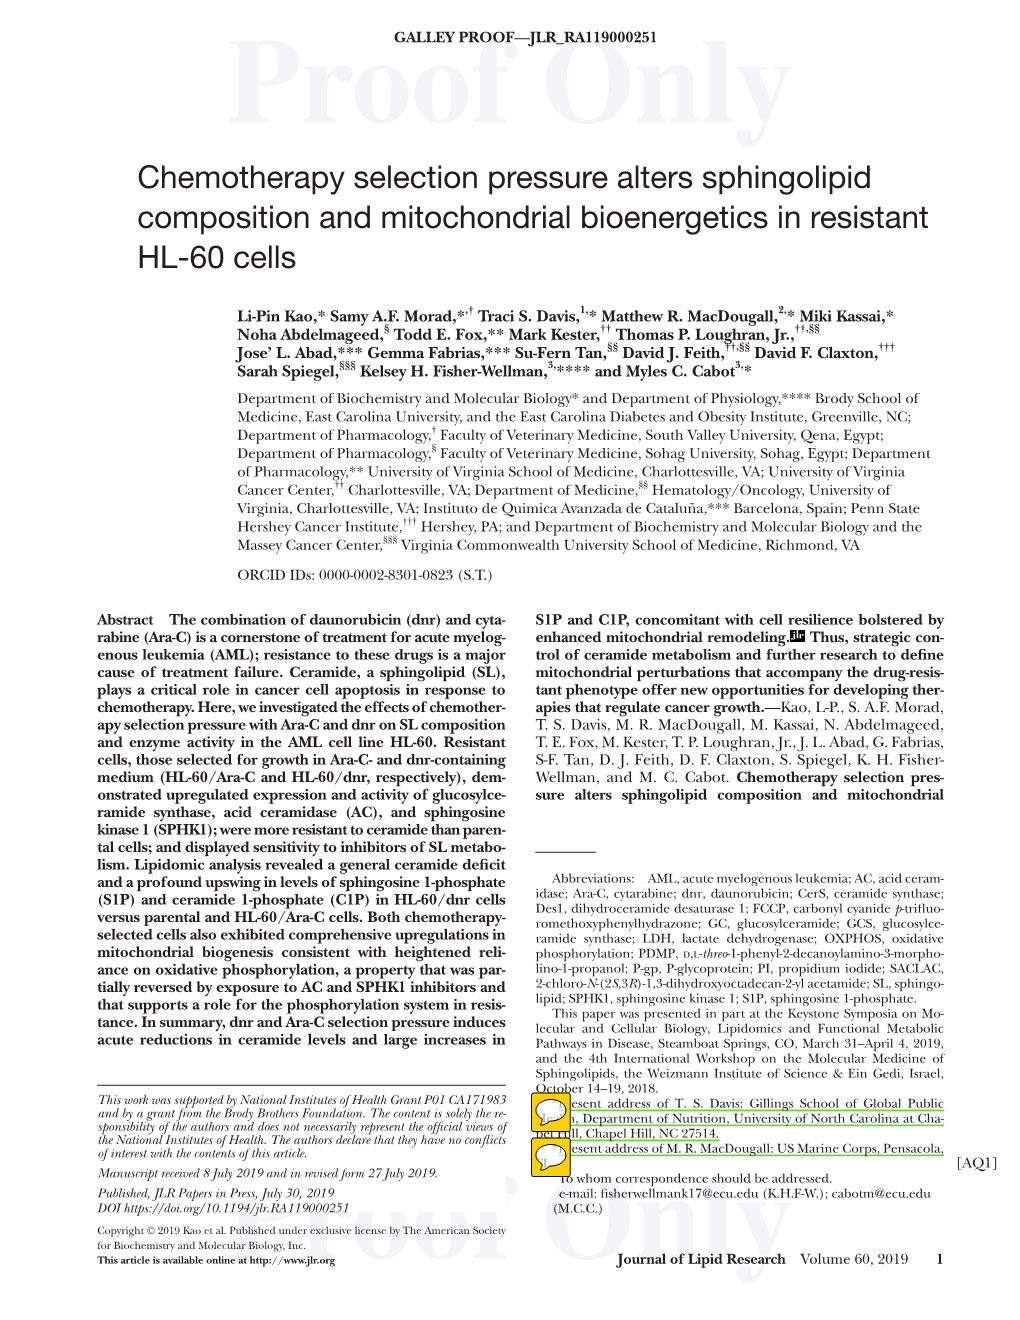 Chemotherapy Selection Pressure Alters Sphingolipid Composition and Mitochondrial Bioenergetics in Resistant HL-60 Cells